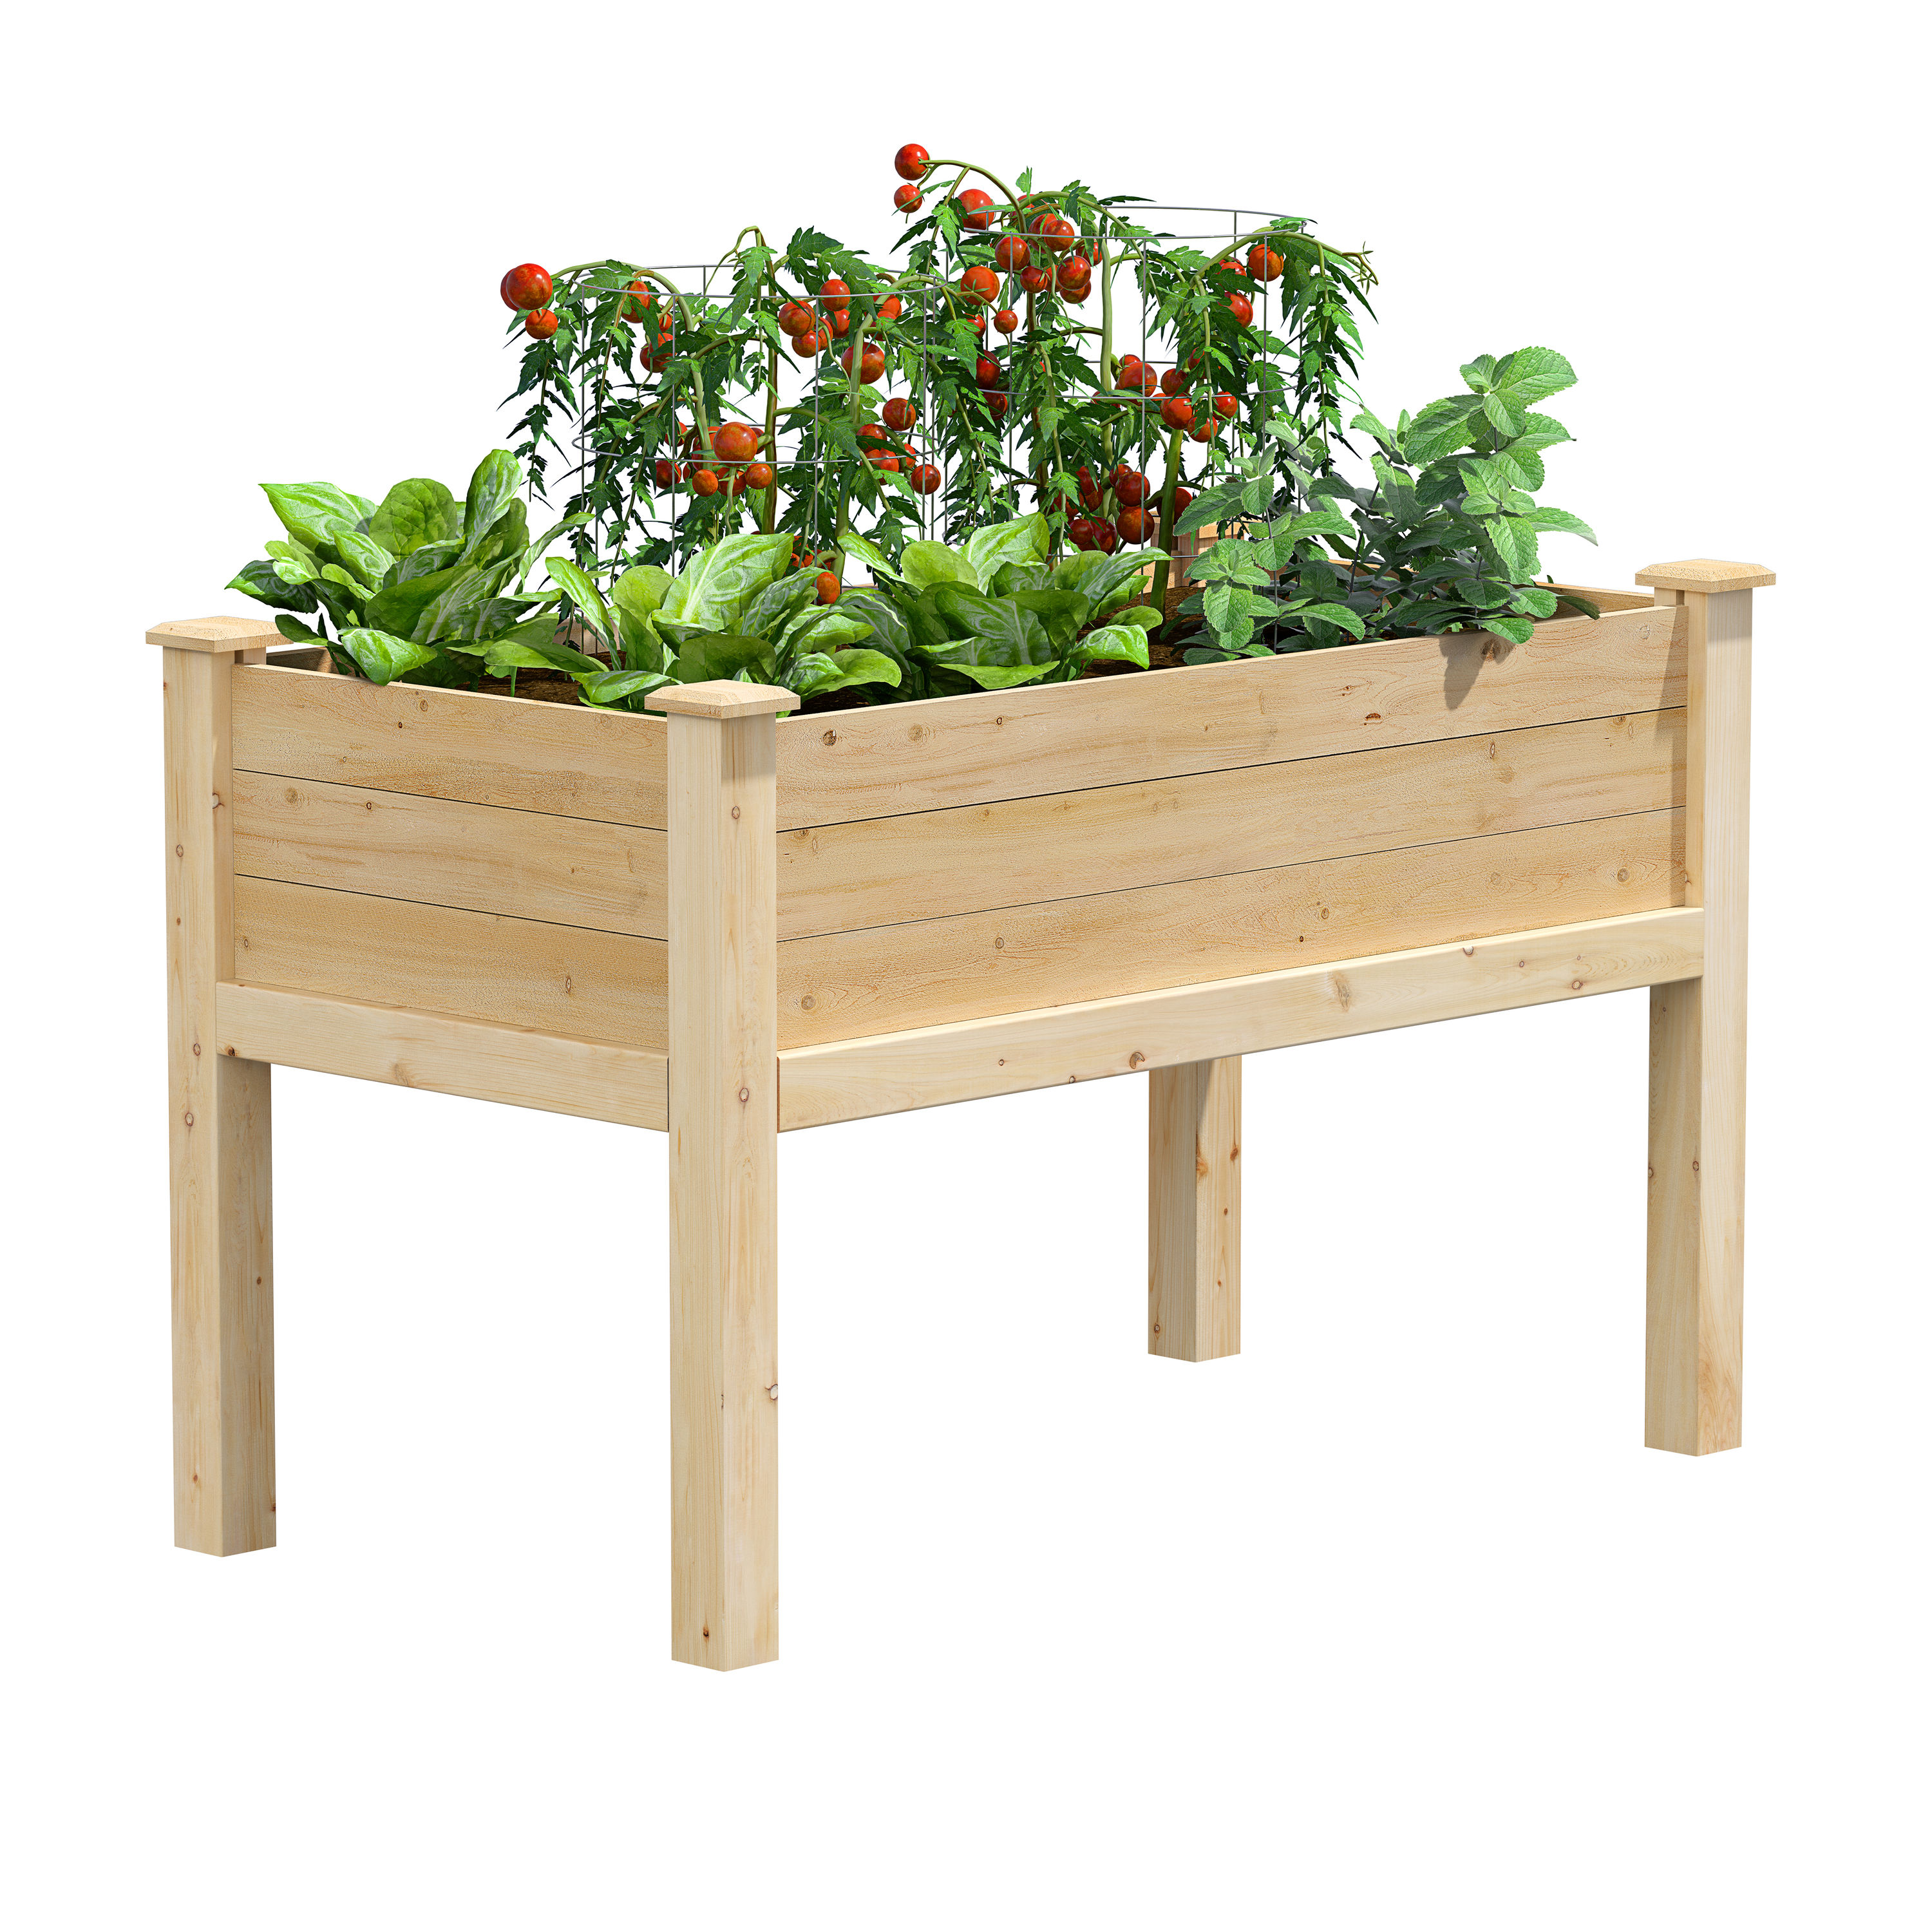 Patio Outdoor Solid Wood Raised Garden Bed Kit Elevated Wood Planter Garden Box Stand for for Backyard 4x4 FT